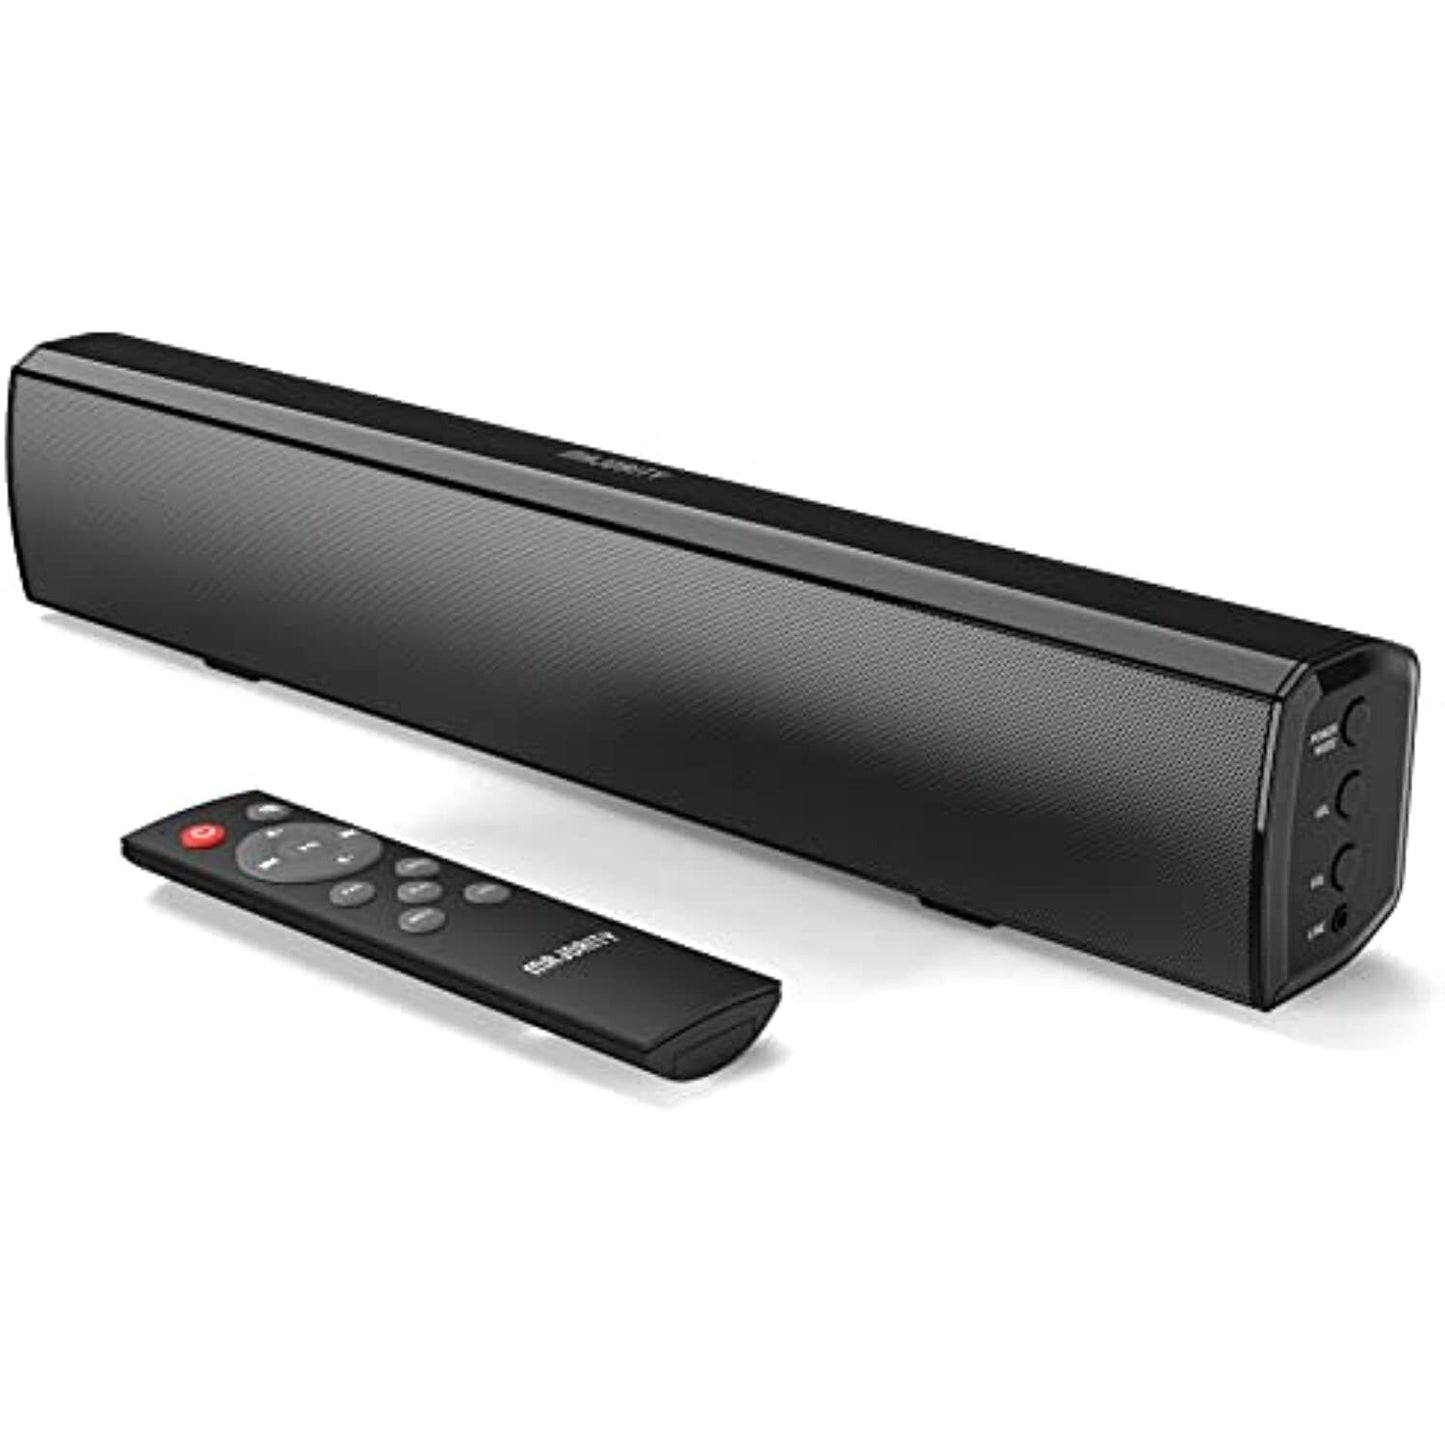 Majority Bowfell Small Sound Bar for TV with Bluetooth, RCA, USB, Opt, AUX